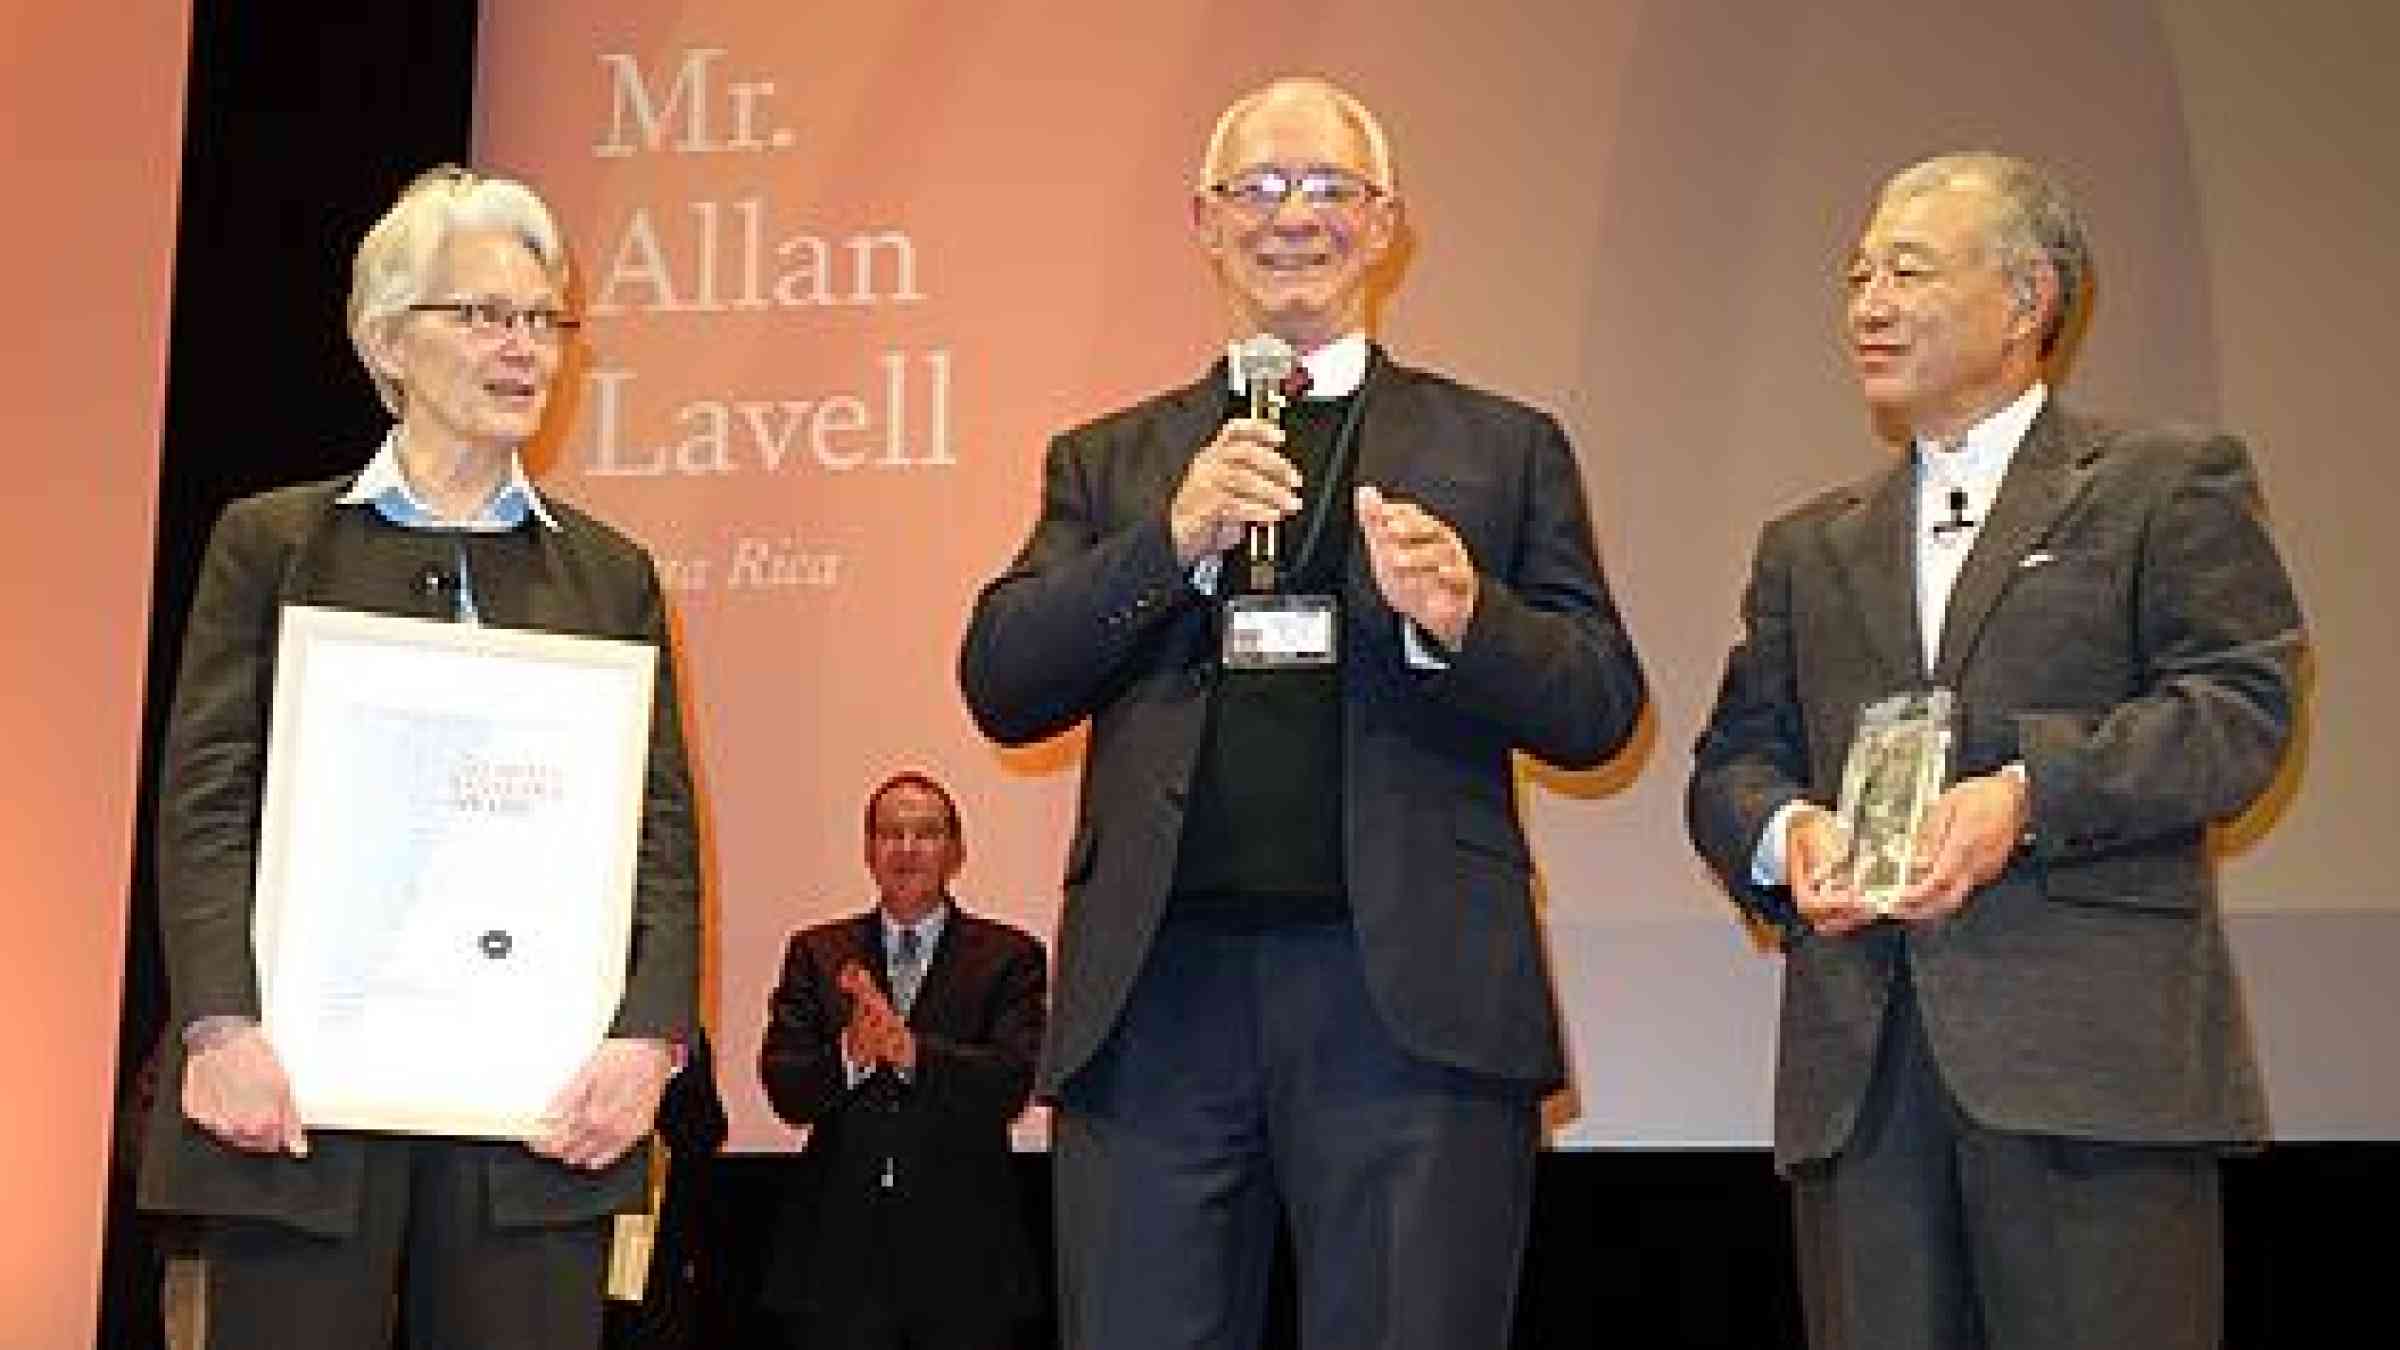 The Sasakawa winner Allan Lavall  is pictured here on stage with the head of UNISDR, Margareta Wahlstrom, and Yohei Sasakawa,chairman, the Nippon Foundation. (Photo: UNISDR)